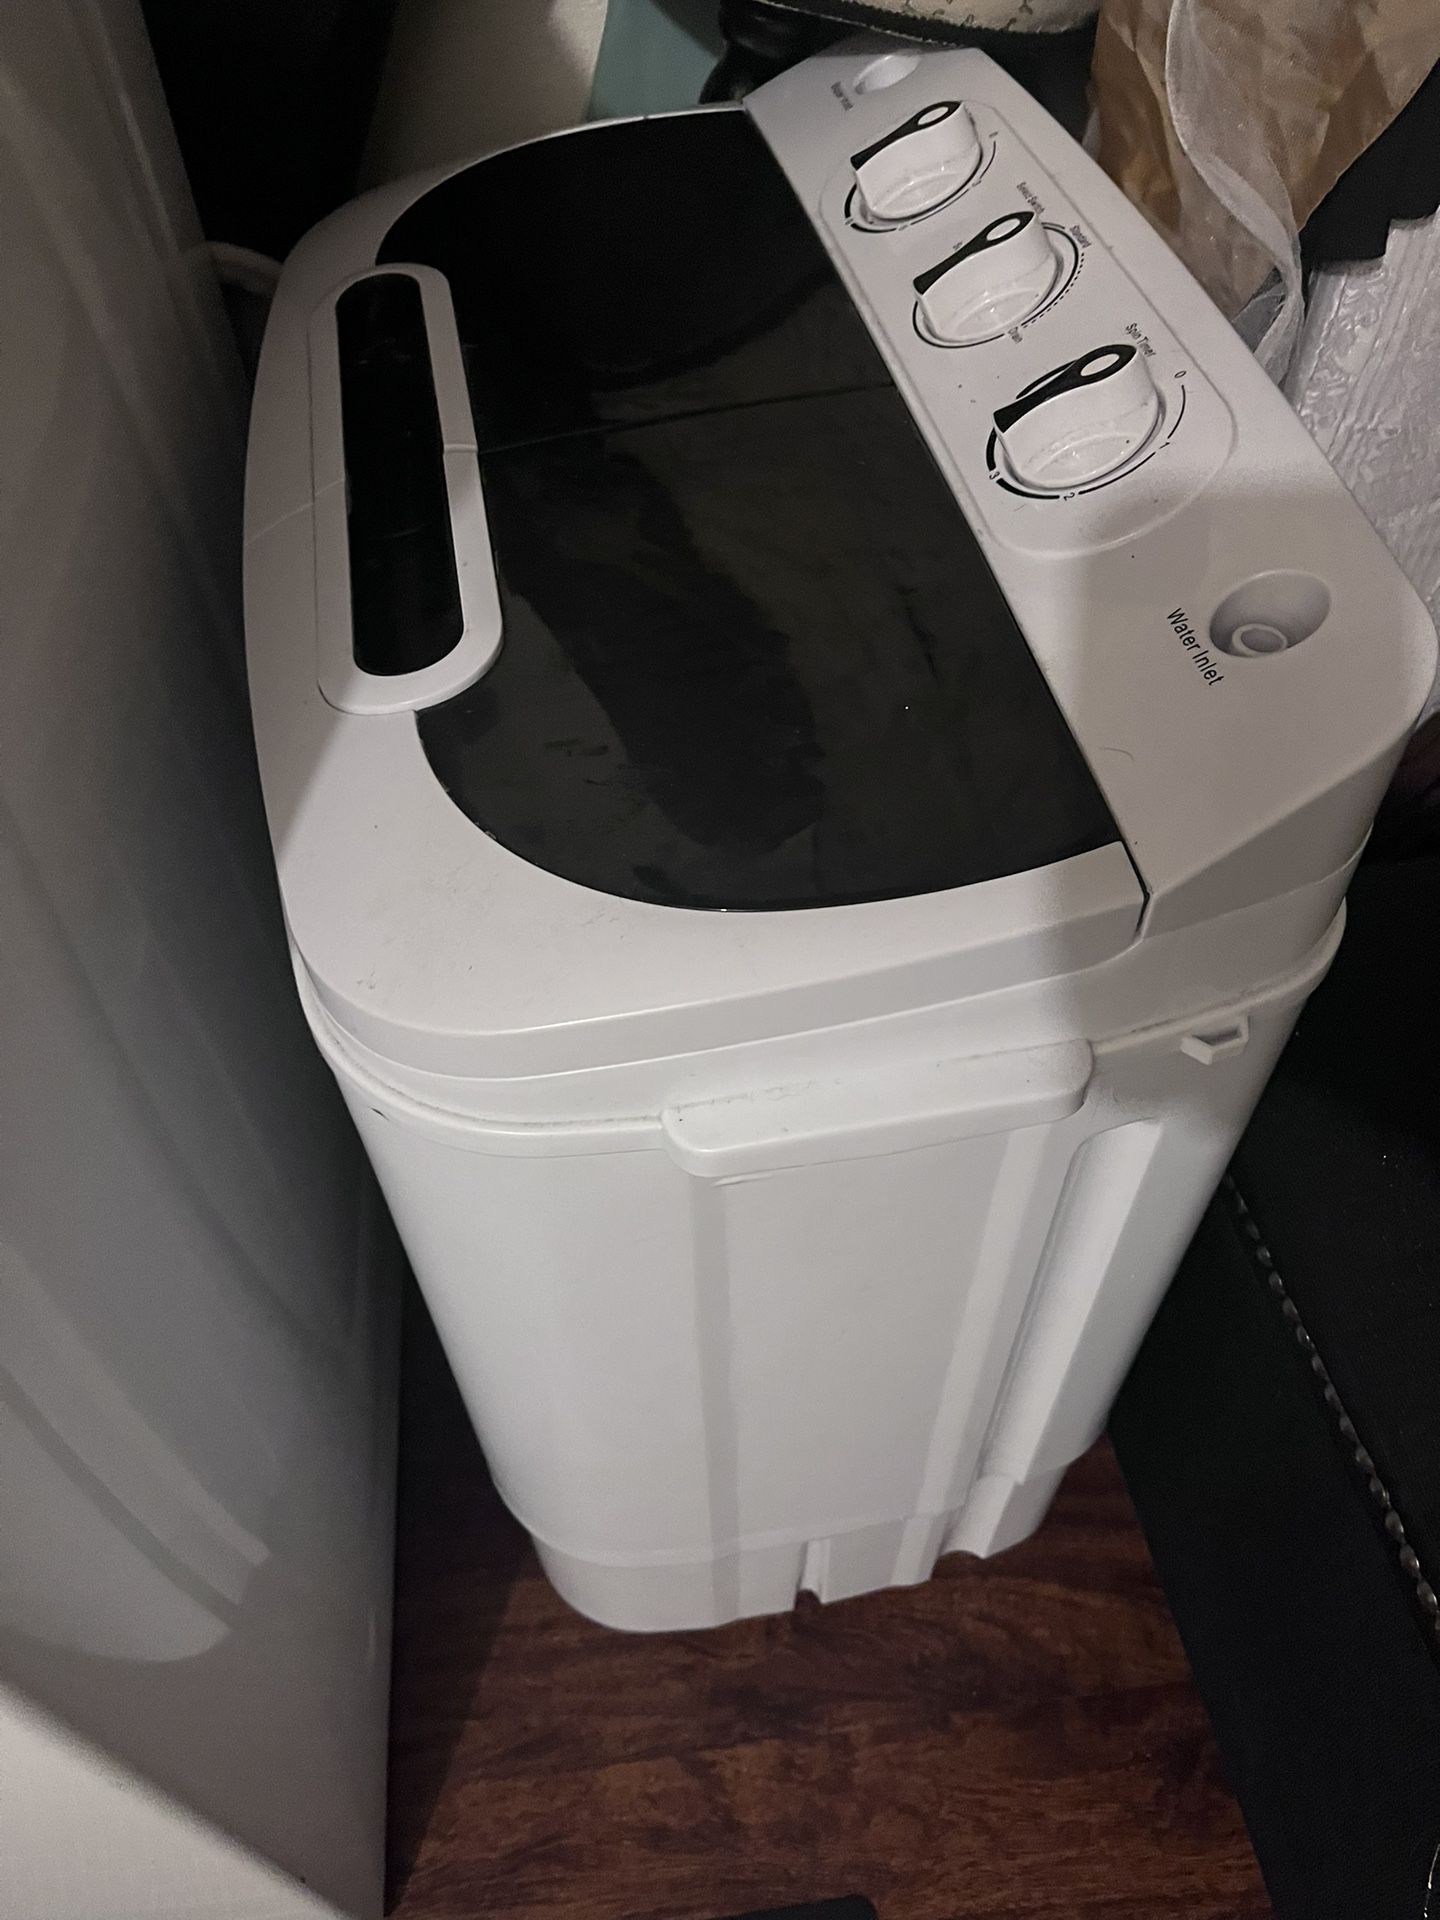 Compact Portable Washing And Drying Machine